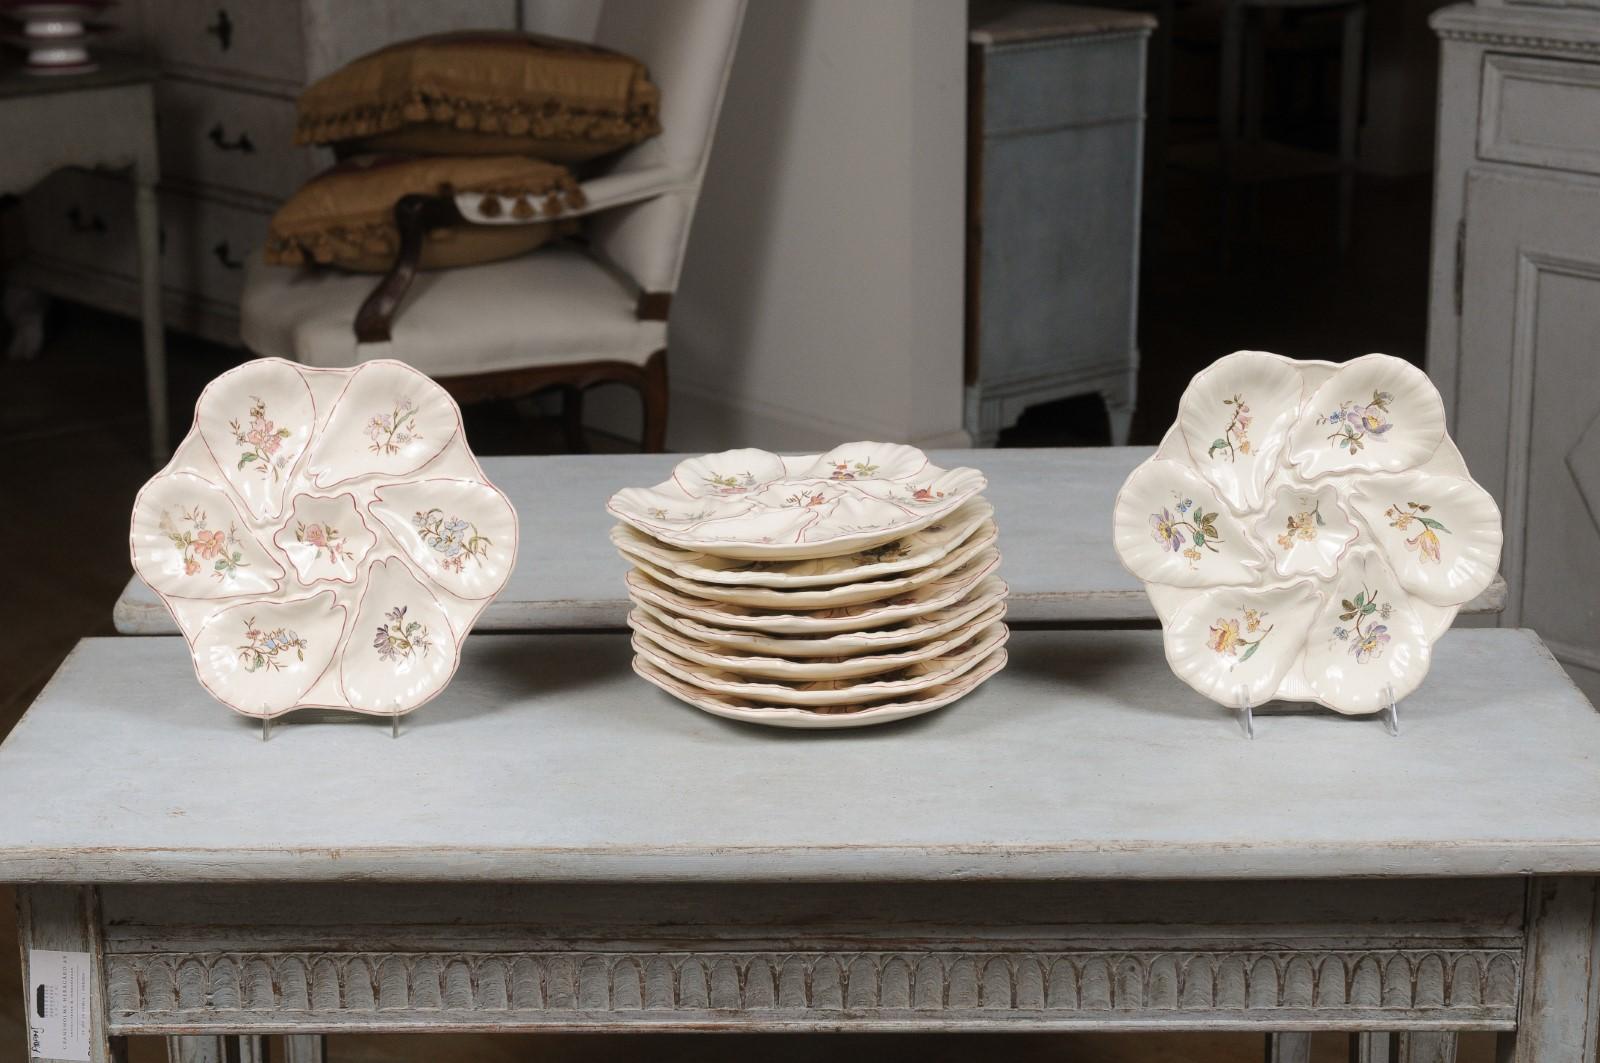 French Longchamp Terre de Fer Majolica oyster plates from the late 19th century, with flowers and pink outline. We currently have 10 plates available, priced and sold individually. Also view oyster platter LU835919236182 should you need the whole